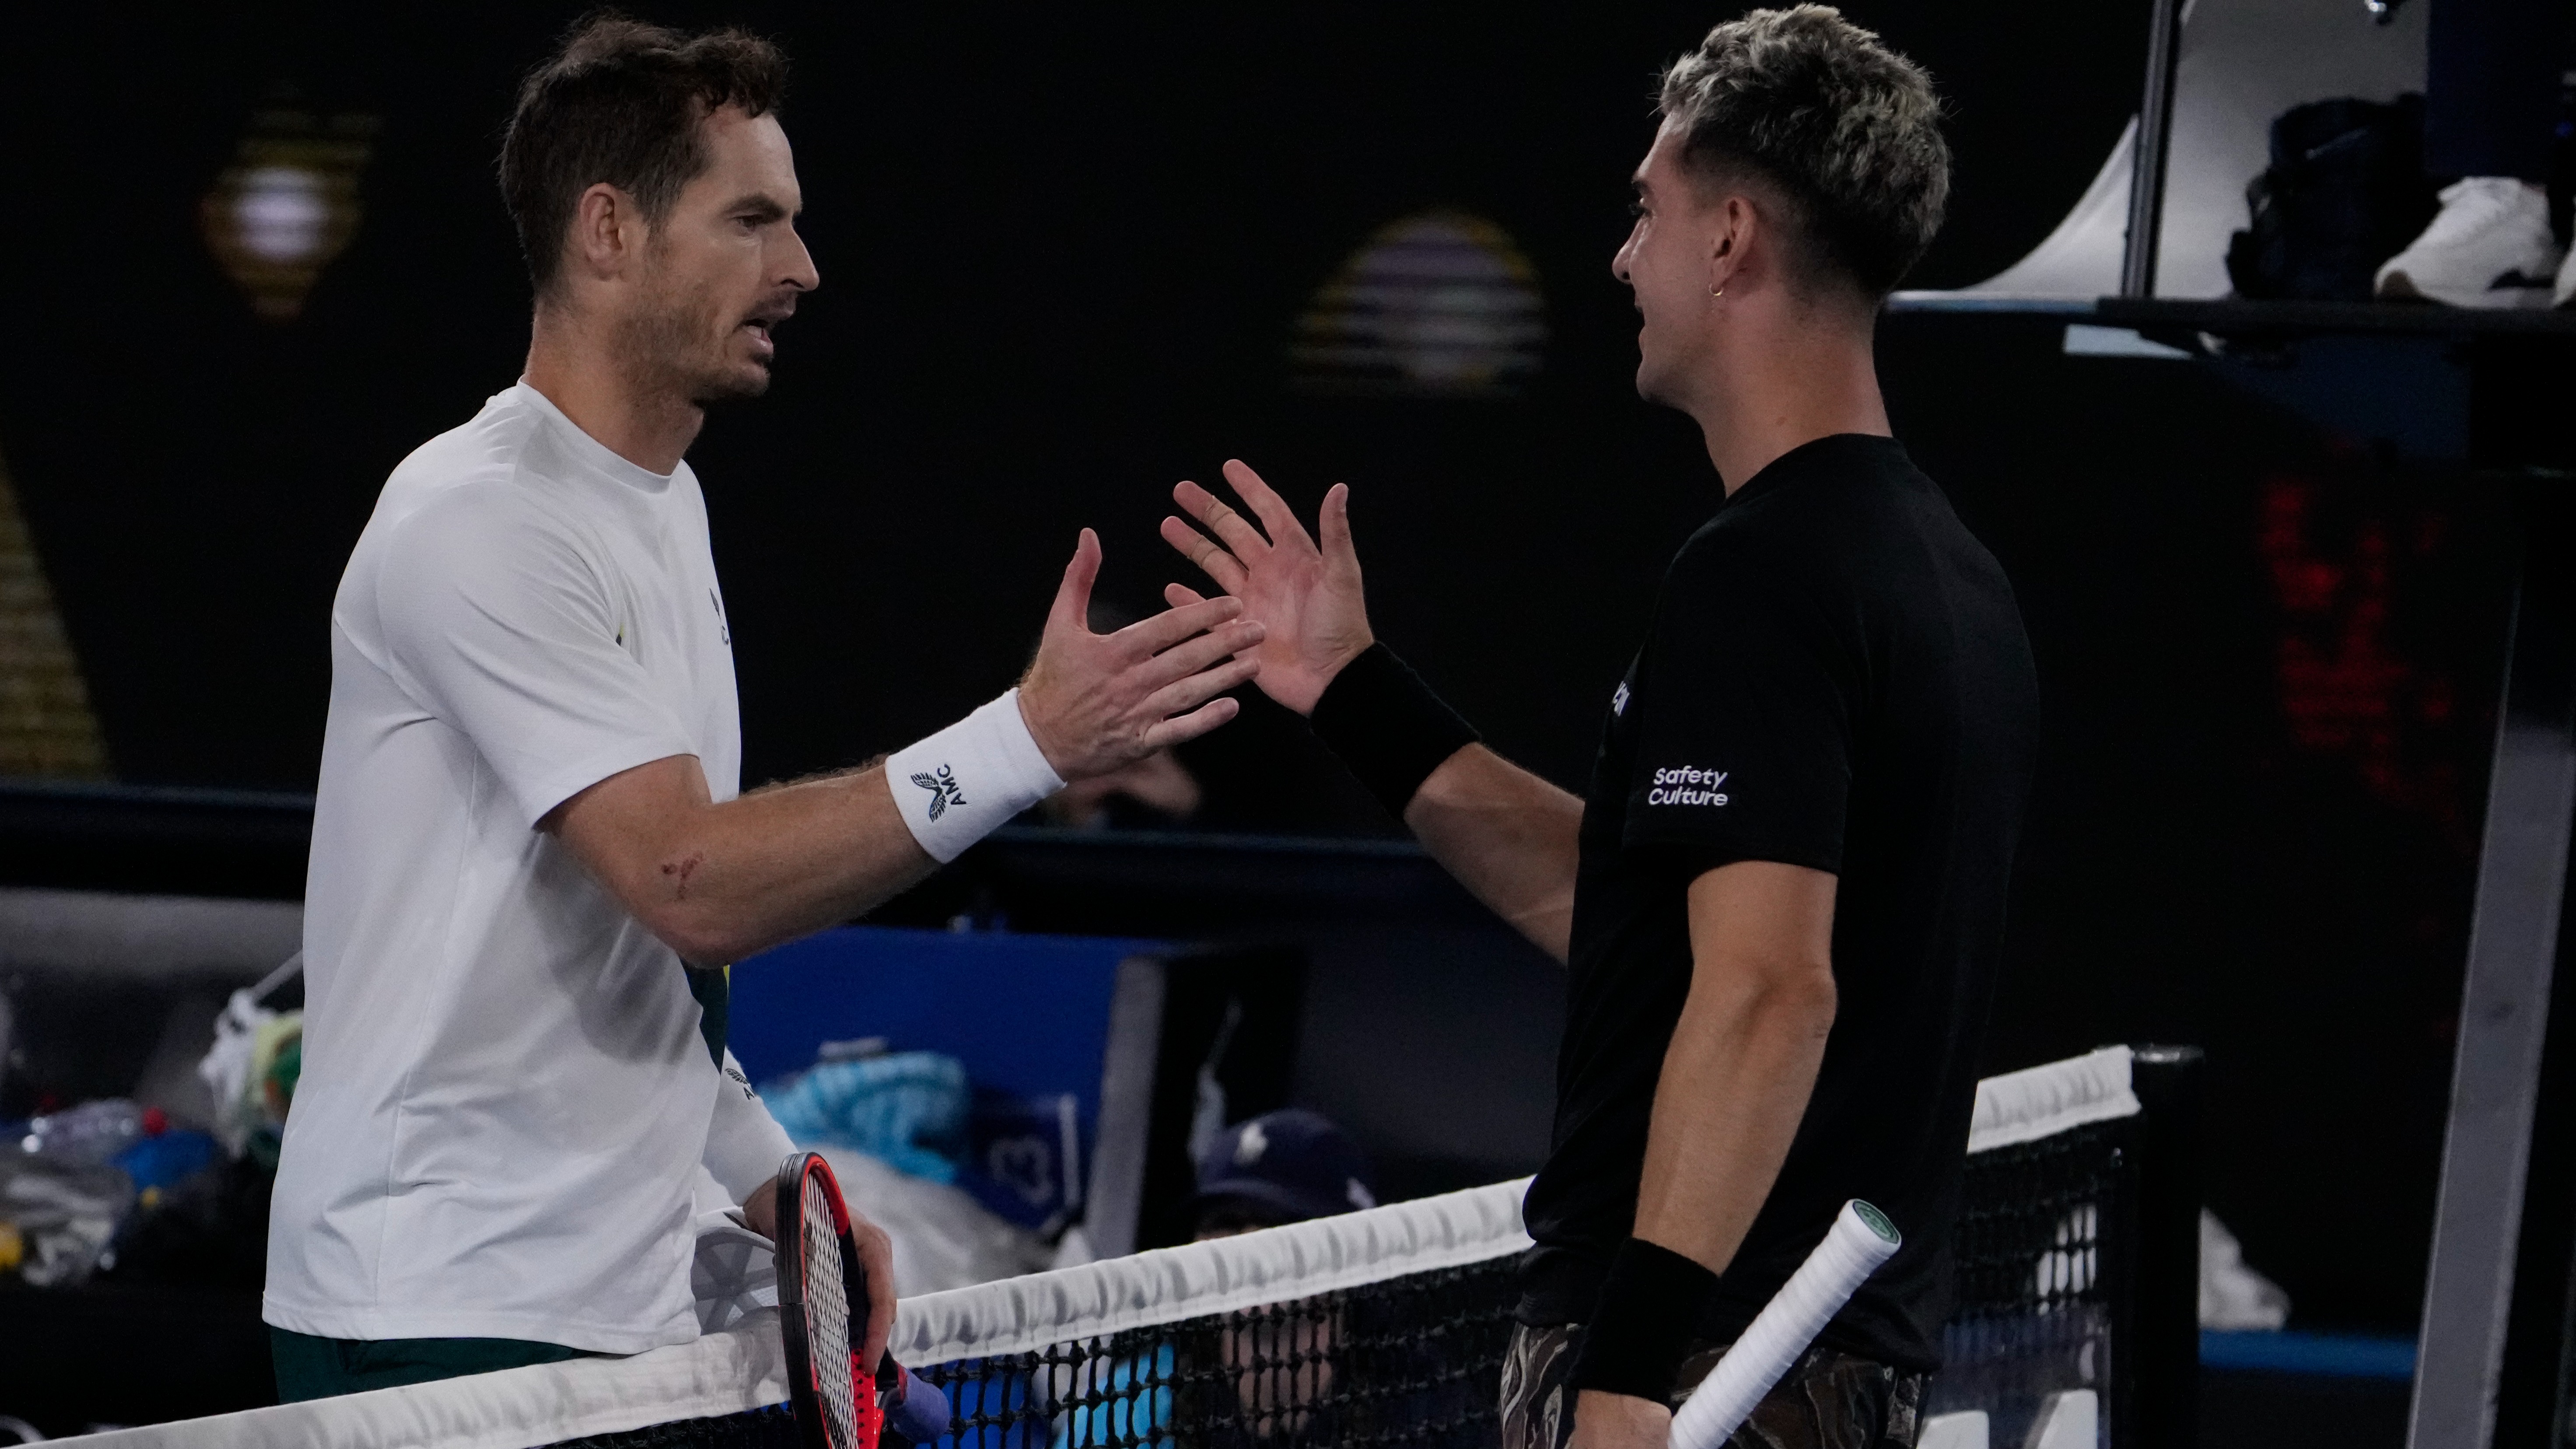 Is there a Netflix curse on Australian Open tennis players? - Seattle Sports